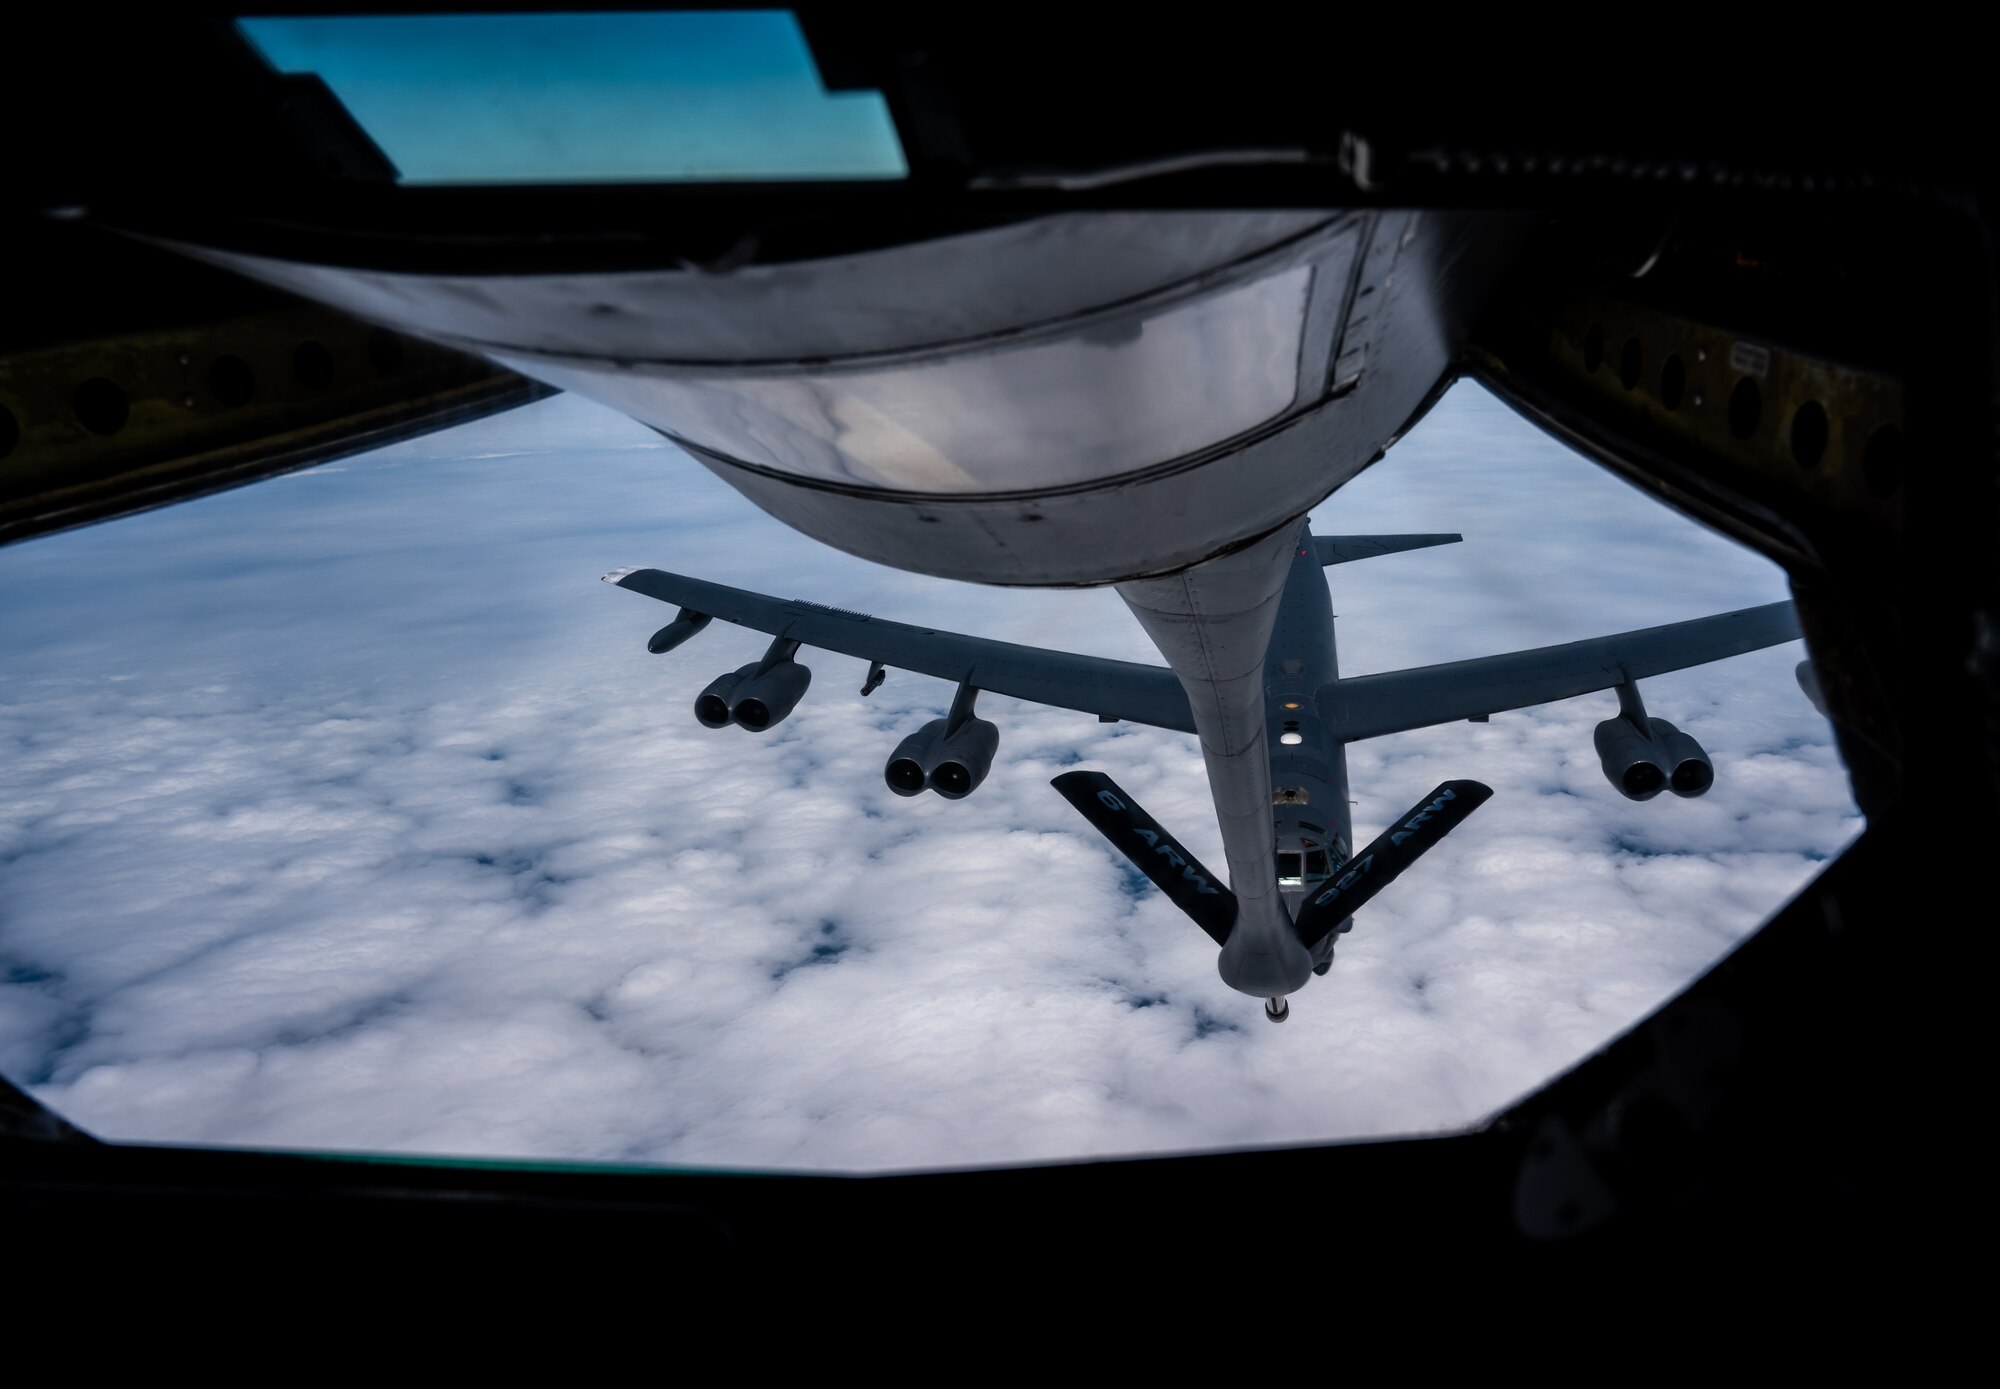 A B-52H Stratofortress assigned to the 5th Bomb Wing prepares to receive fuel from a KC-135 Stratotanker assigned to the 6th Air Refueling Wing fly over the Pacific Ocean during an air refueling mission July 17, 2023, in support of Mobility Guardian 2023. A multilateral endeavor, MG23 features seven participating countries – Australia, Canada, France, Japan, New Zealand, United Kingdom, and the United States – operating approximately 70 mobility aircraft across multiple locations spanning a 3,000 mile exercise area from July 5th through July 21. Our Allies and partners are one of our greatest strengths and a key strategic advantage. MG23 is an opportunity to deepen our connections with regional Allies and partners using bold initiatives. (U.S. Air Force photo by Tech. Sgt. Alexander Cook)